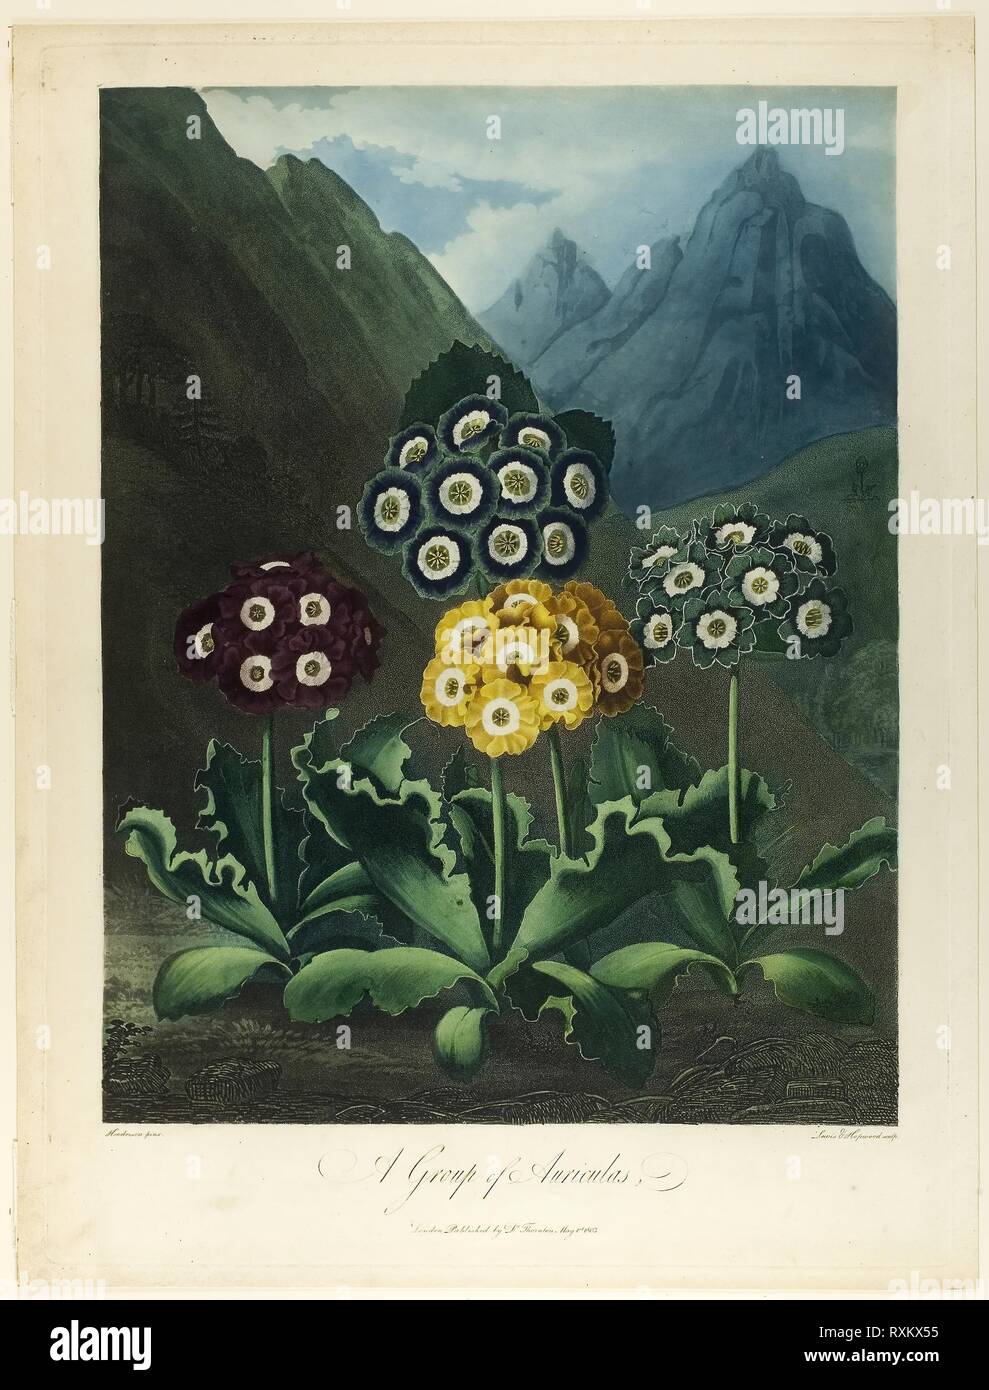 A Group of Auriculas, from The Temple of Flora. Frederick Christian Lewis, the elder (English, 1779-1856); James Hopwood, the elder (English, c. 1752-1819); after Peter Charles Henderson (English, active 1791-1829); published by Dr. Robert John Thornton (English, 1768-1837). Date: 1803. Dimensions: 250 × 185 mm (image); 375 × 277 mm (plate); 385 × 310 mm (sheet). Color aquatint, with stipple engraving and etching, inked à la poupée, with watercolor (hand-coloring) on cream wove paper. Origin: England. Museum: The Chicago Art Institute. Author: L. V. Hopwood. Stock Photo